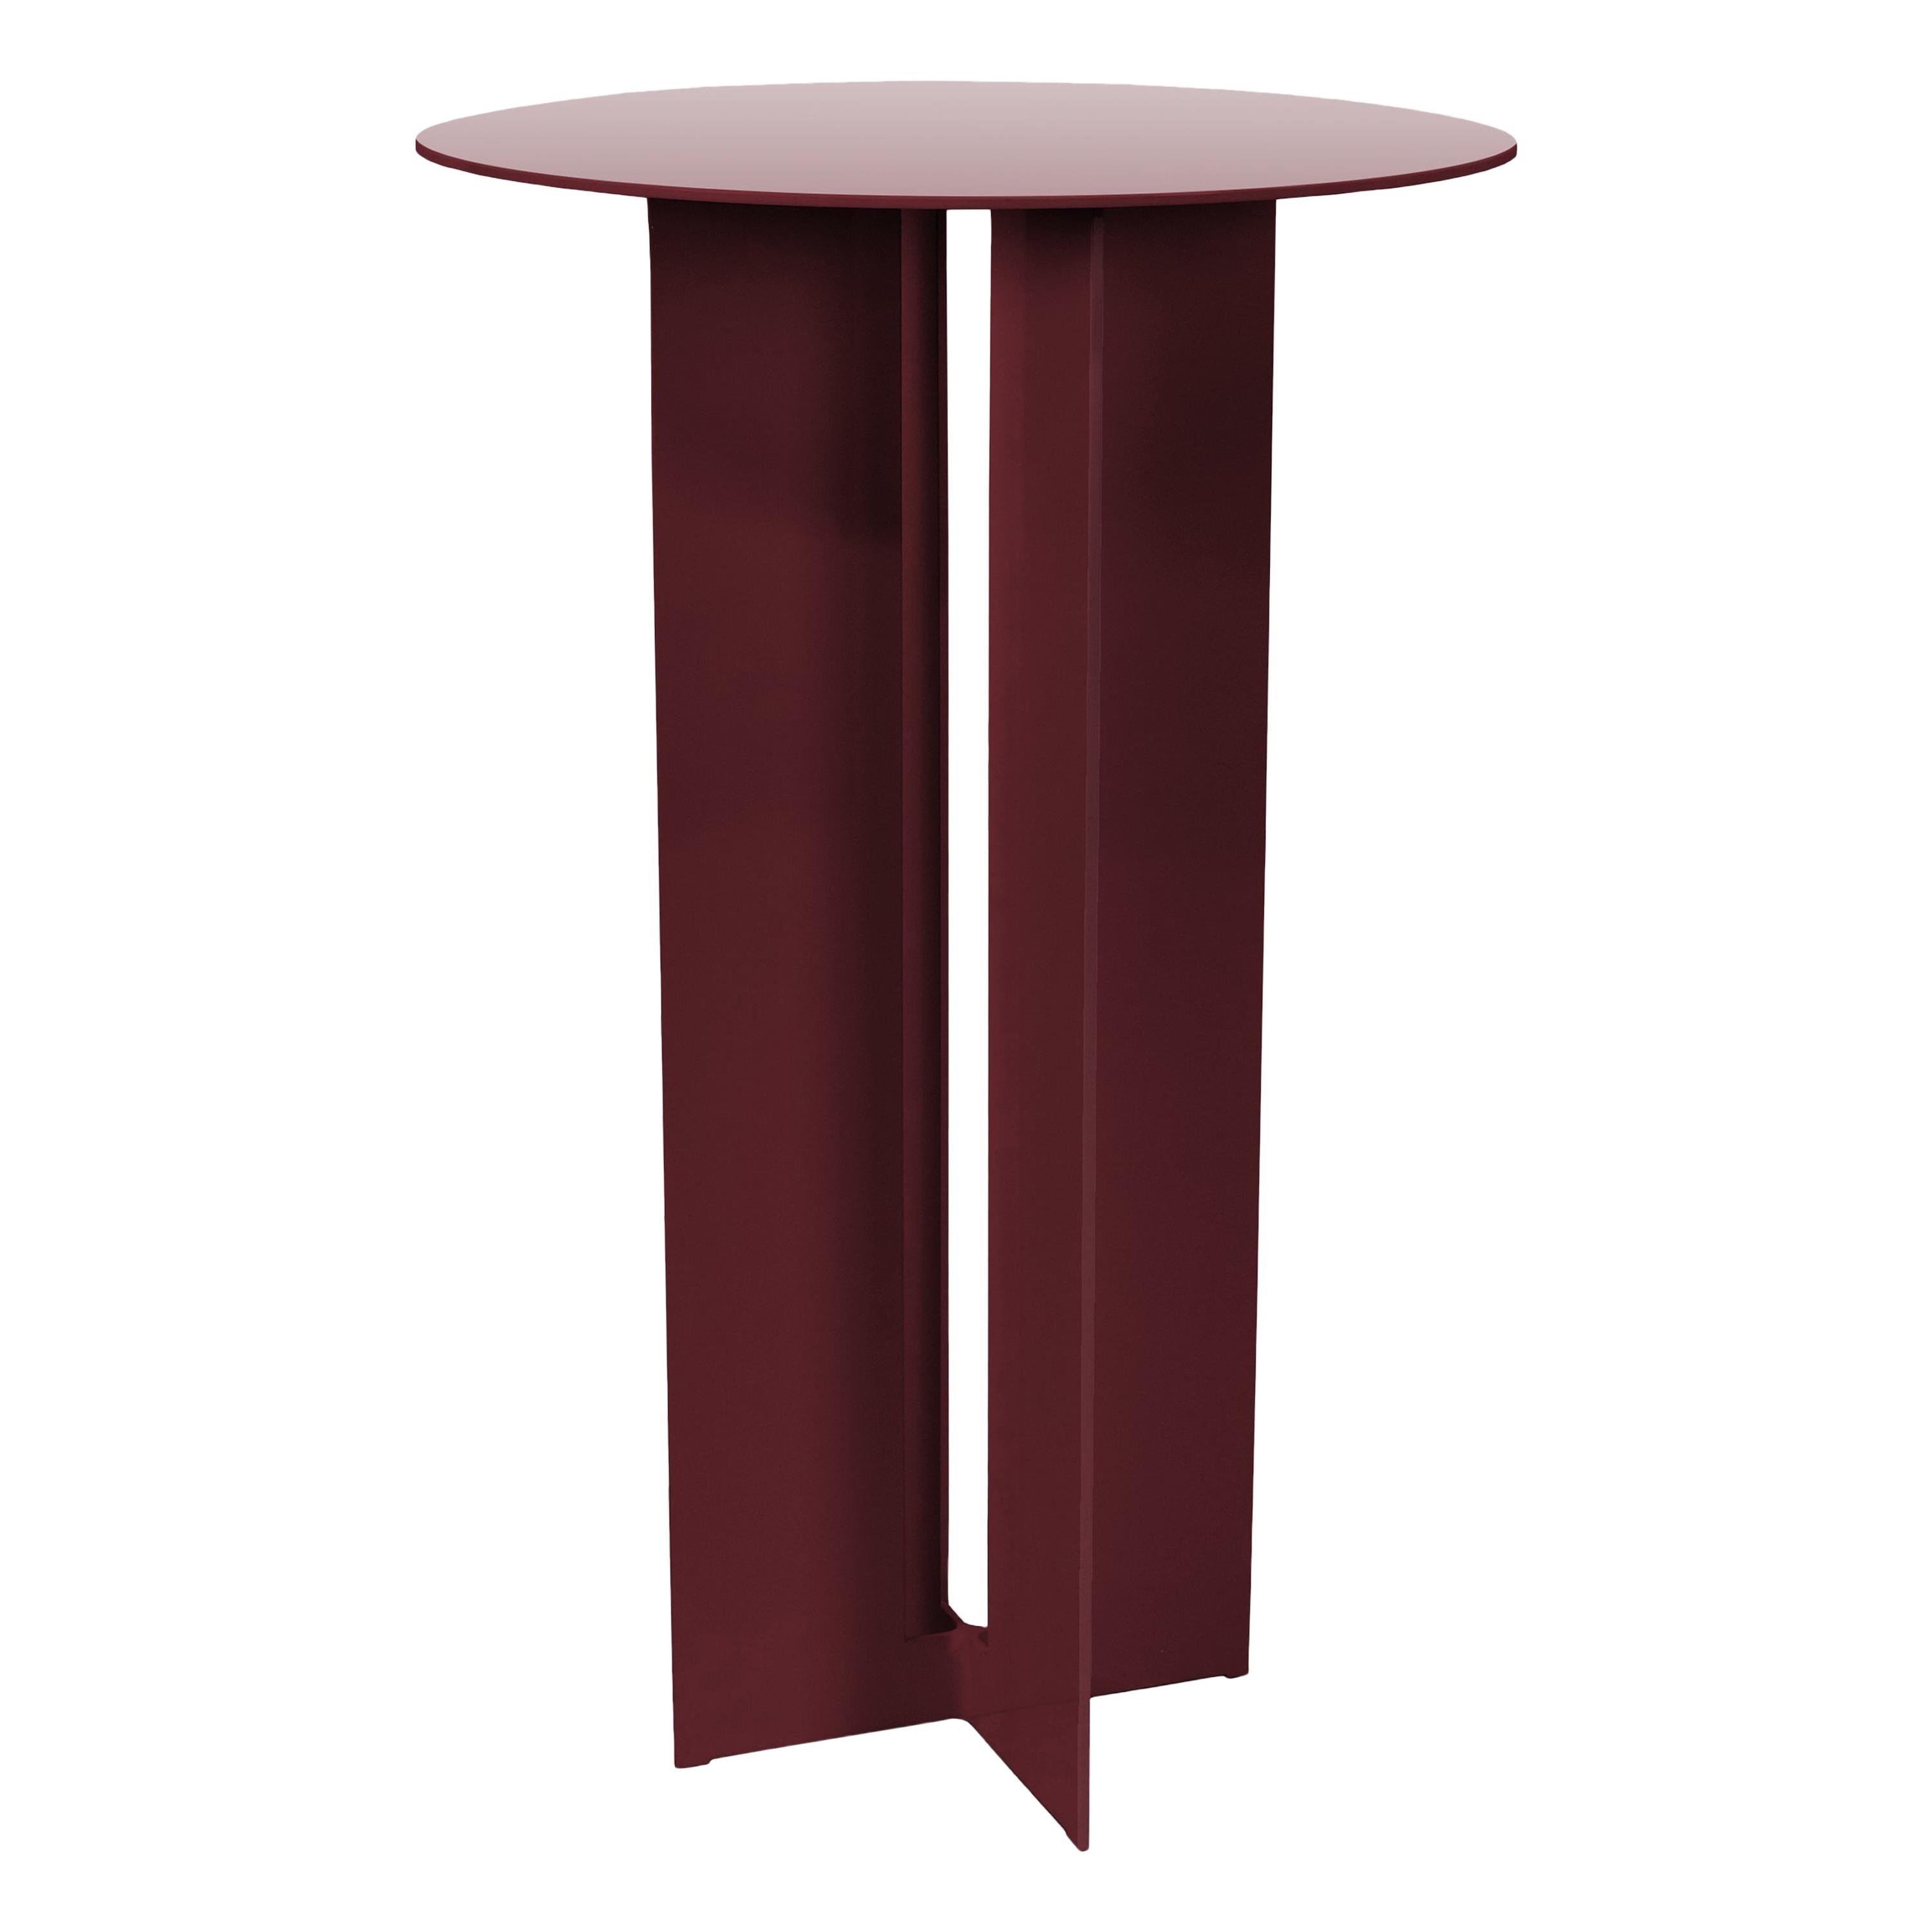 Mers Cafe Table in Burgundy Aluminum For Sale